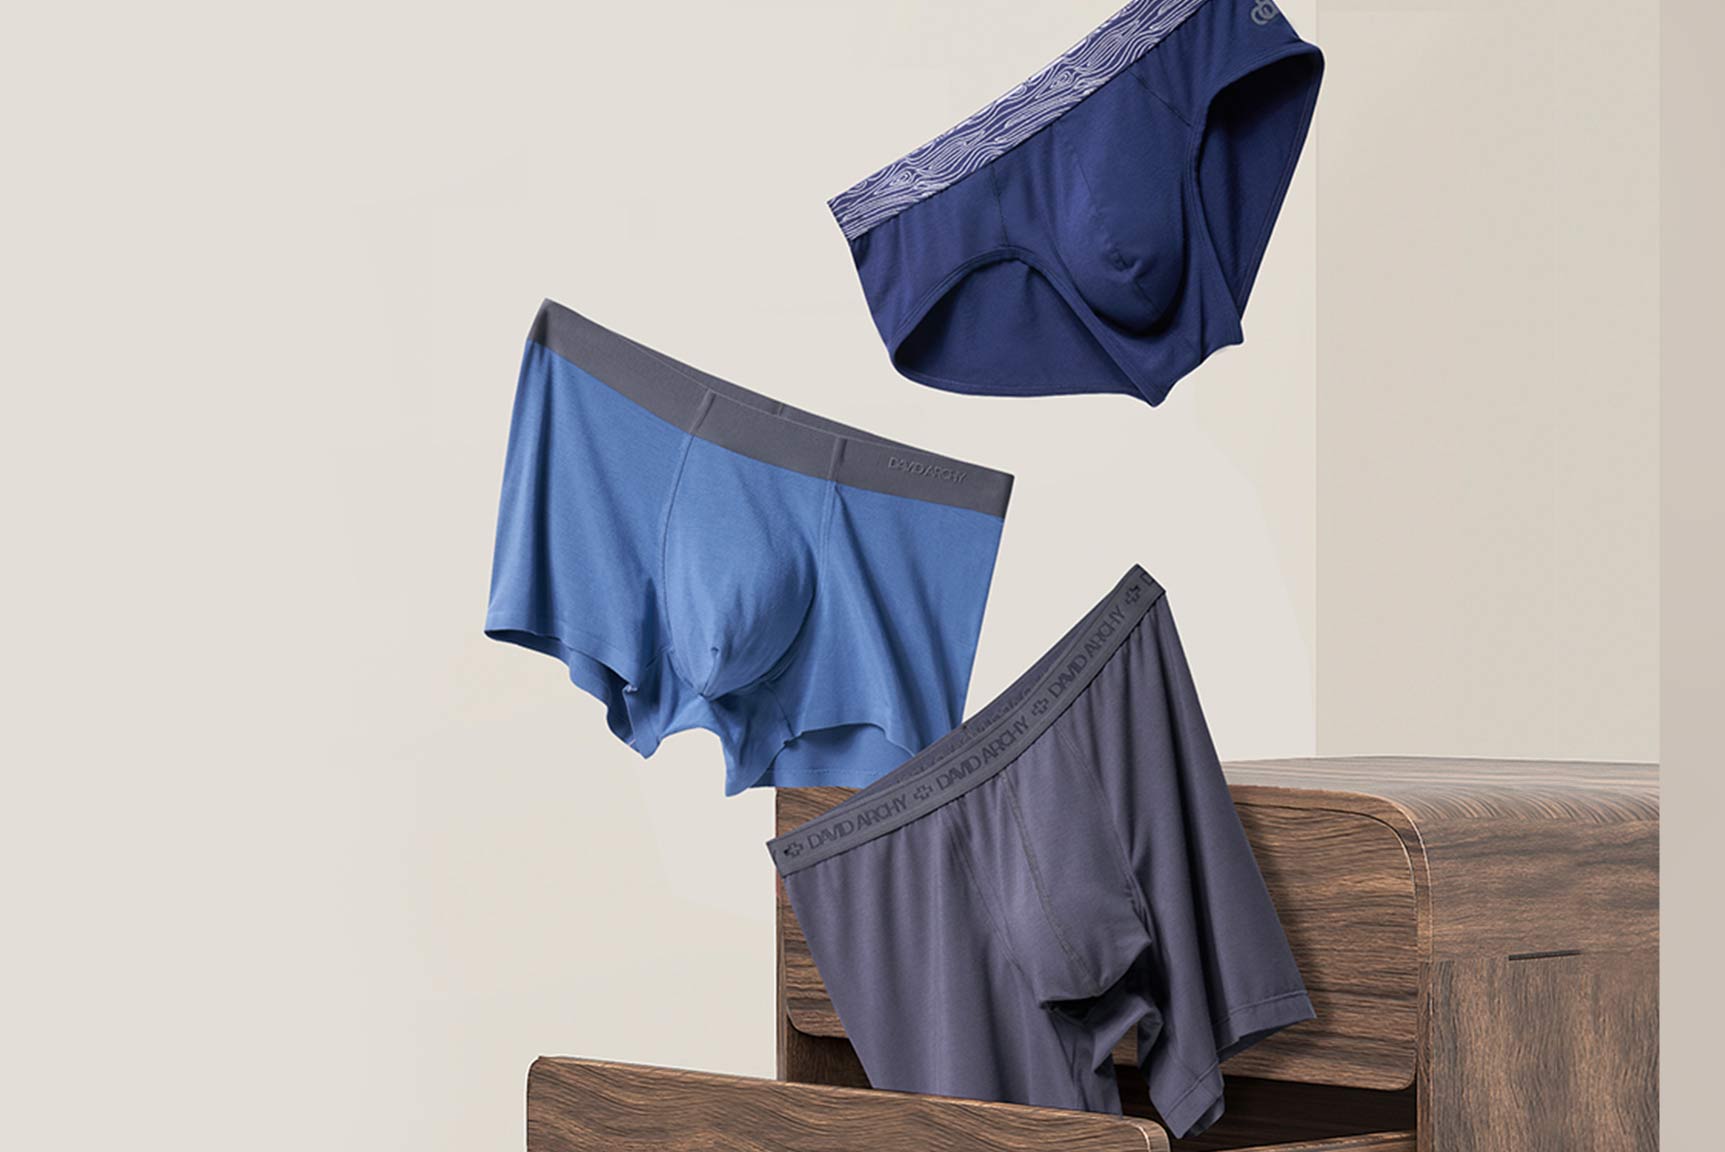 Underwear style for different occasion